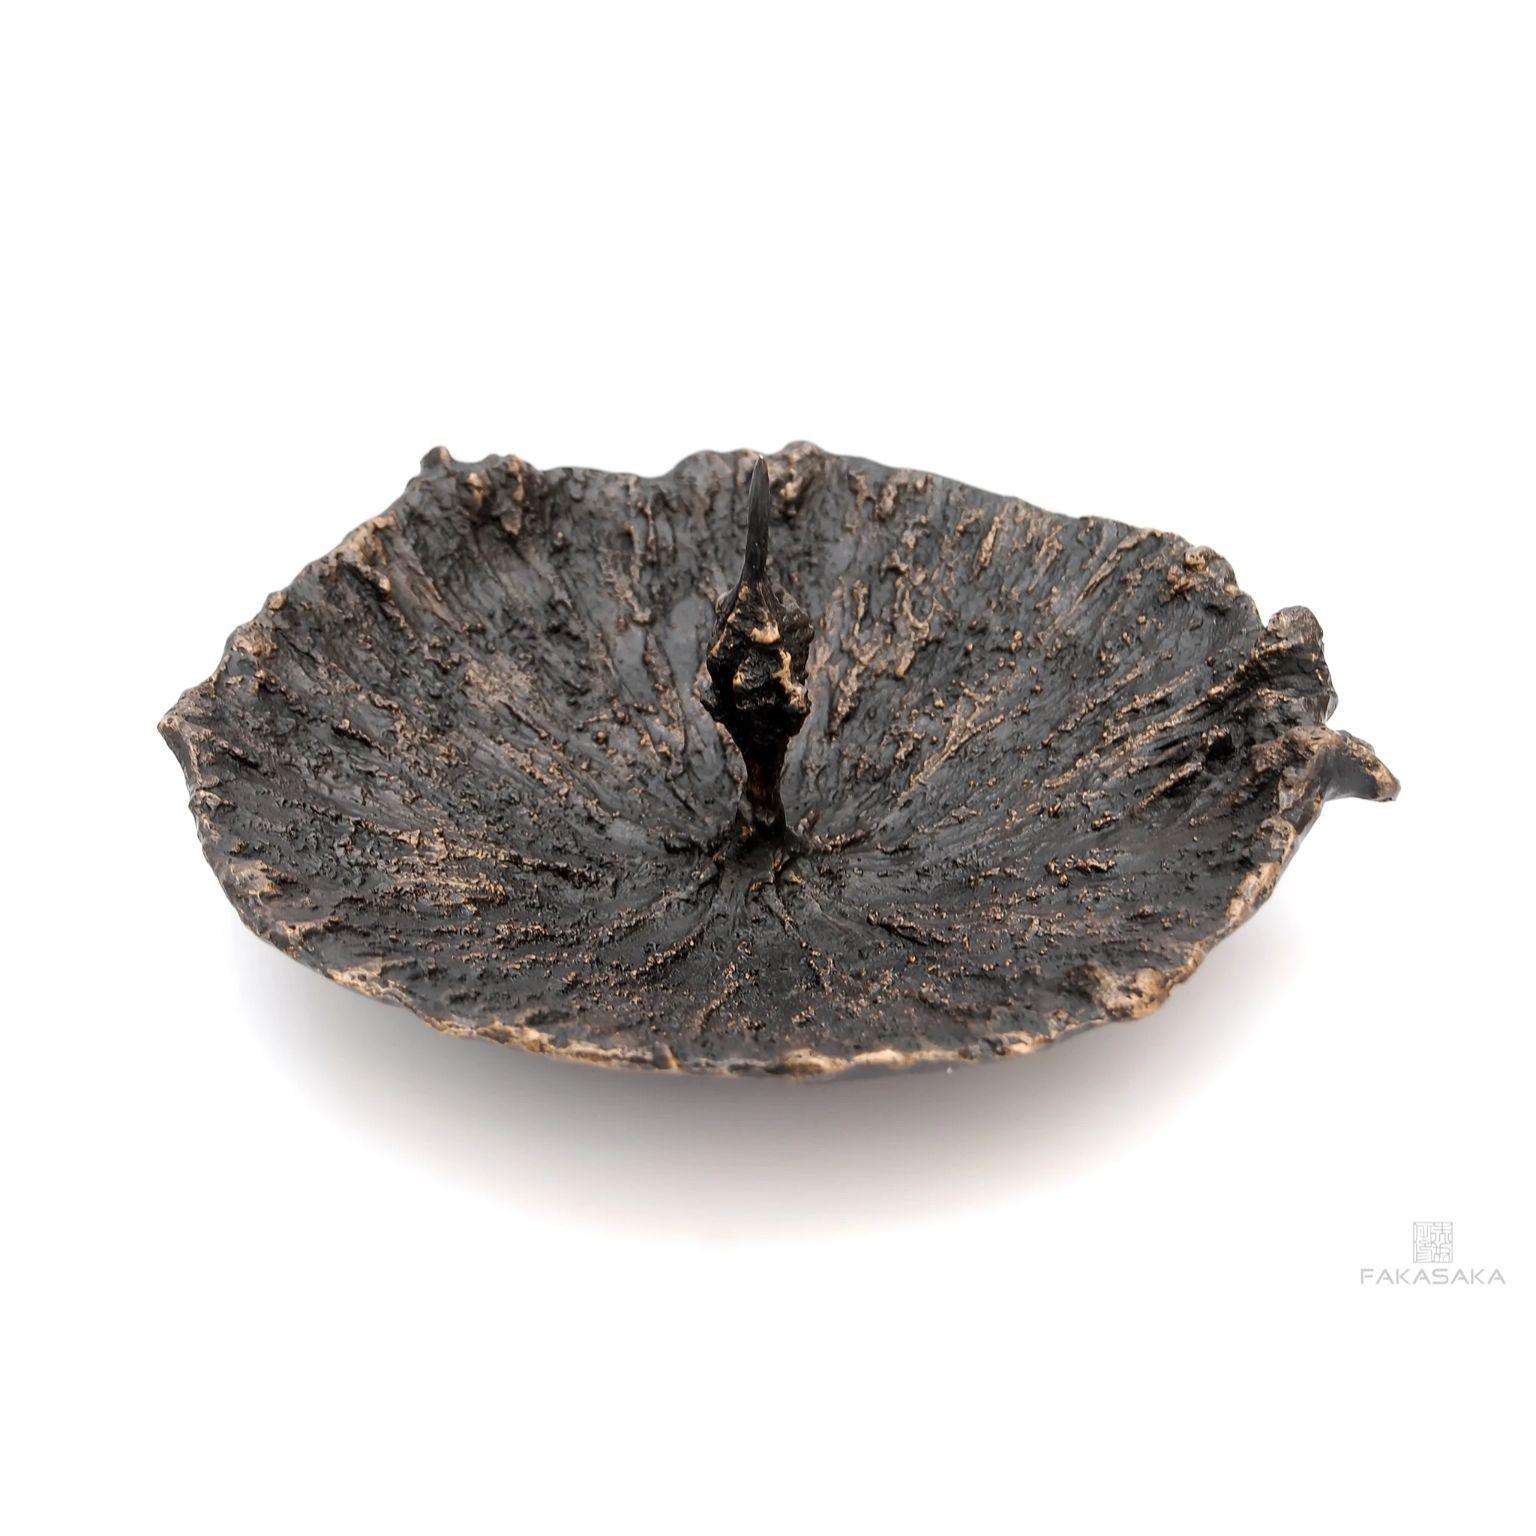 Tomw bowl by Fakasaka Design
Dimensions: W 19 cm D 19 cm H 8.5 cm.
Materials: dark bronze.

TOMW BOWL / ASHTRAY / CENTERPIECE / CANDLEHOLDER. Also available in polished bronze.

 FAKASAKA is a design company focused on production of high-end